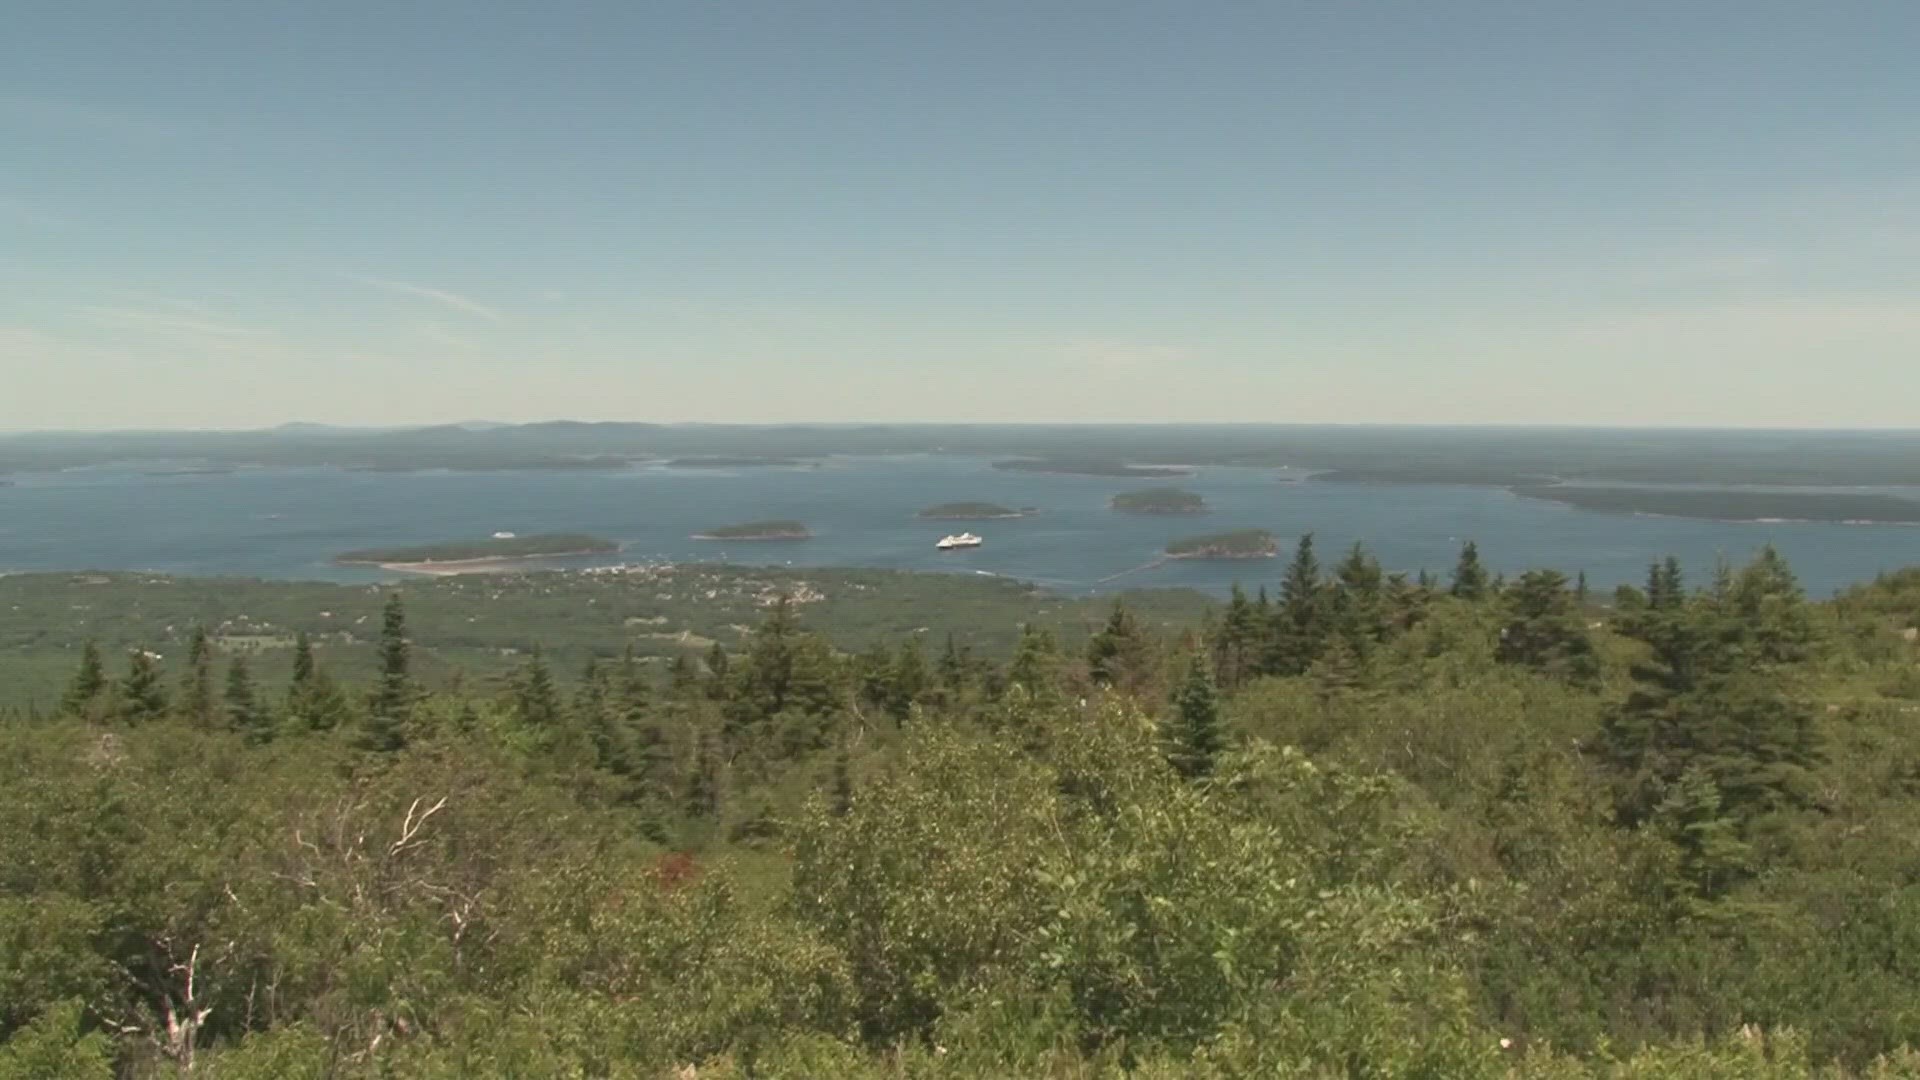 The shuttle service offers one-way and roundtrips to the Cadillac Mountain summit from downtown Bar Harbor.